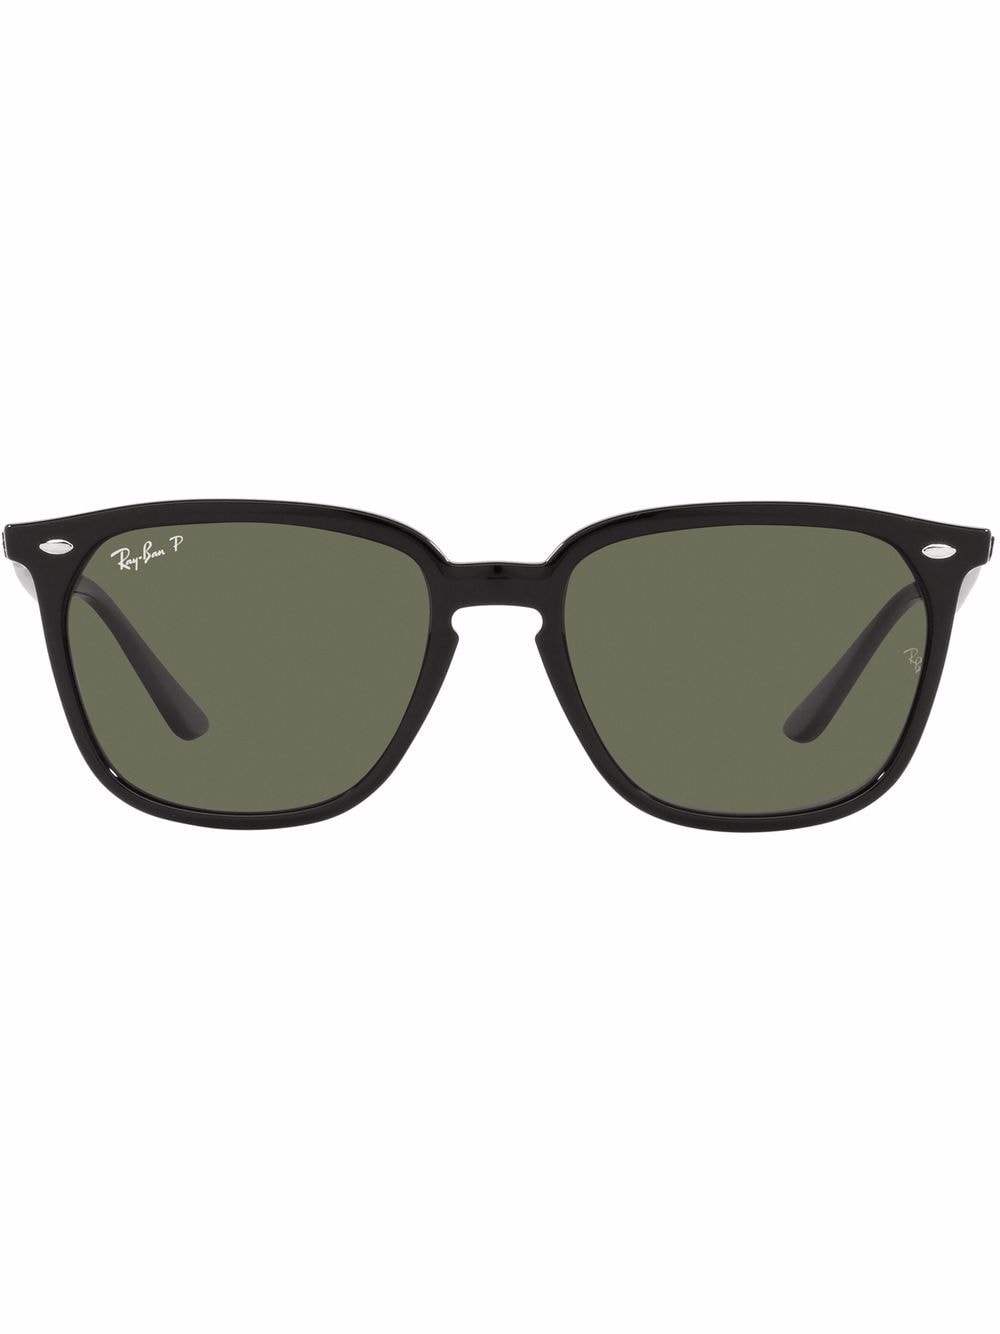 Image 1 of Ray-Ban square-frame sunglasses